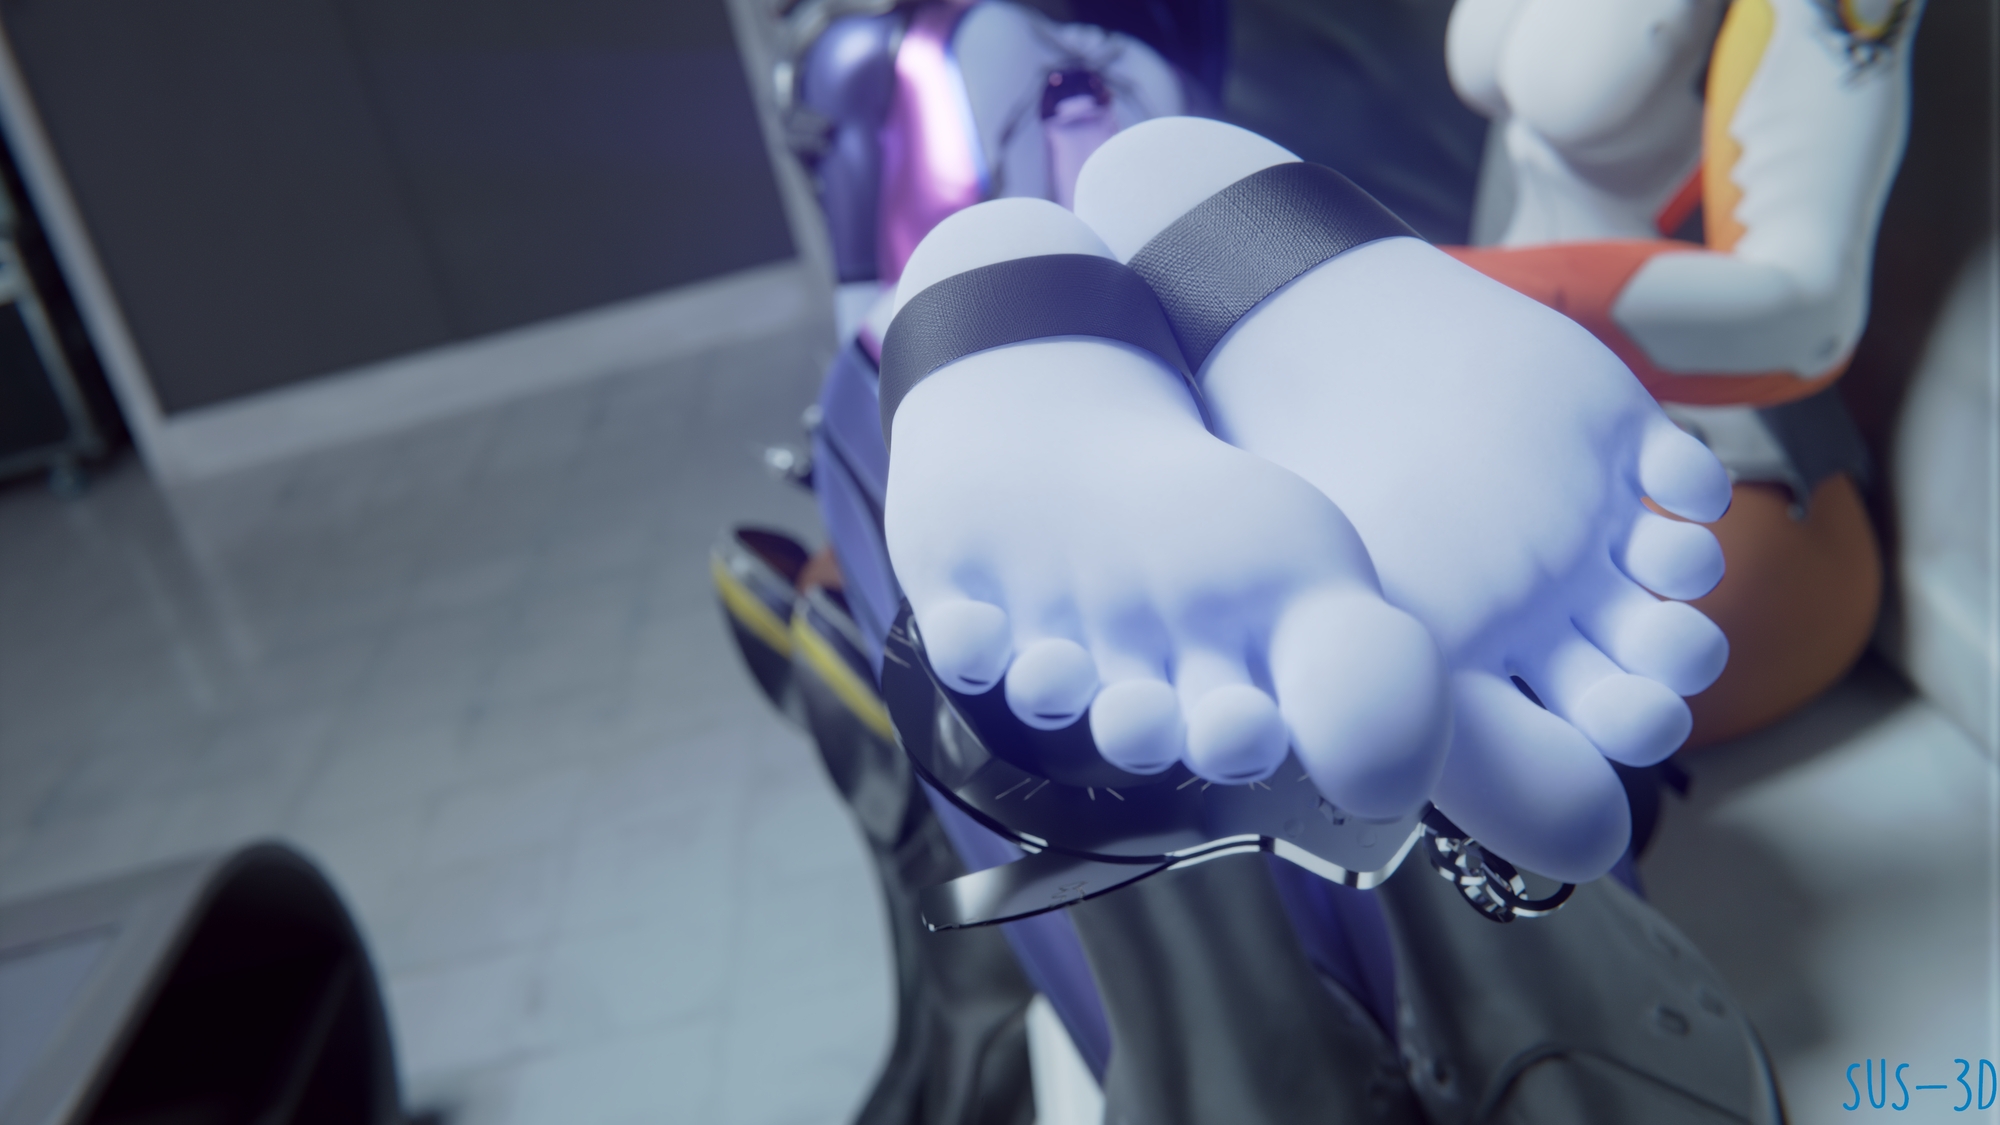 Widowmaker Chained and fucked by Mercy Dildo Overwatch 3D Porn Mercy Widowmaker Overwatch Dildo Sex Toy Lesbian Anal Chained Bondage Sex Rule34 3d Porn Feet 4